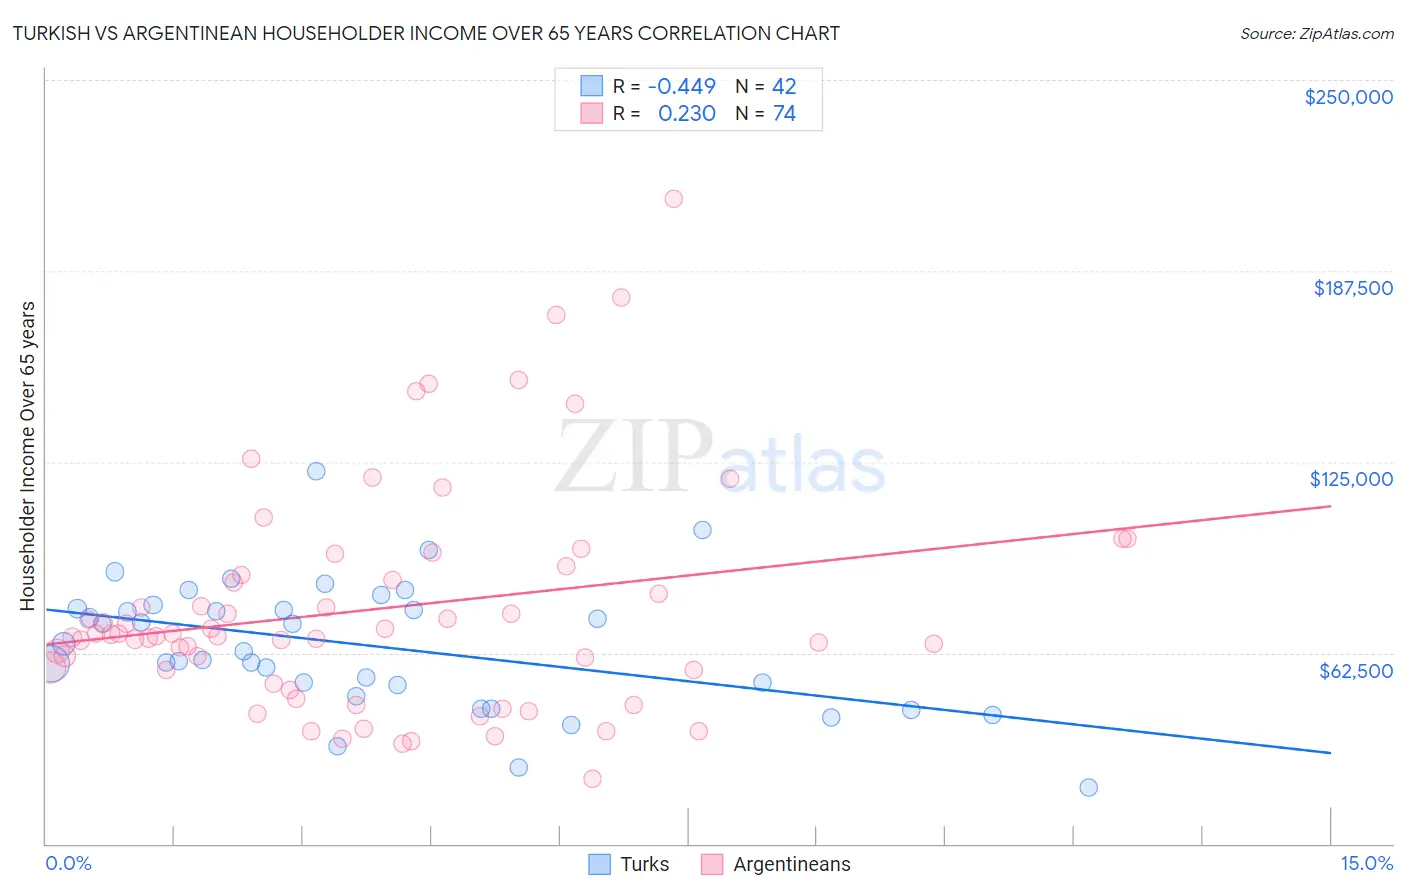 Turkish vs Argentinean Householder Income Over 65 years